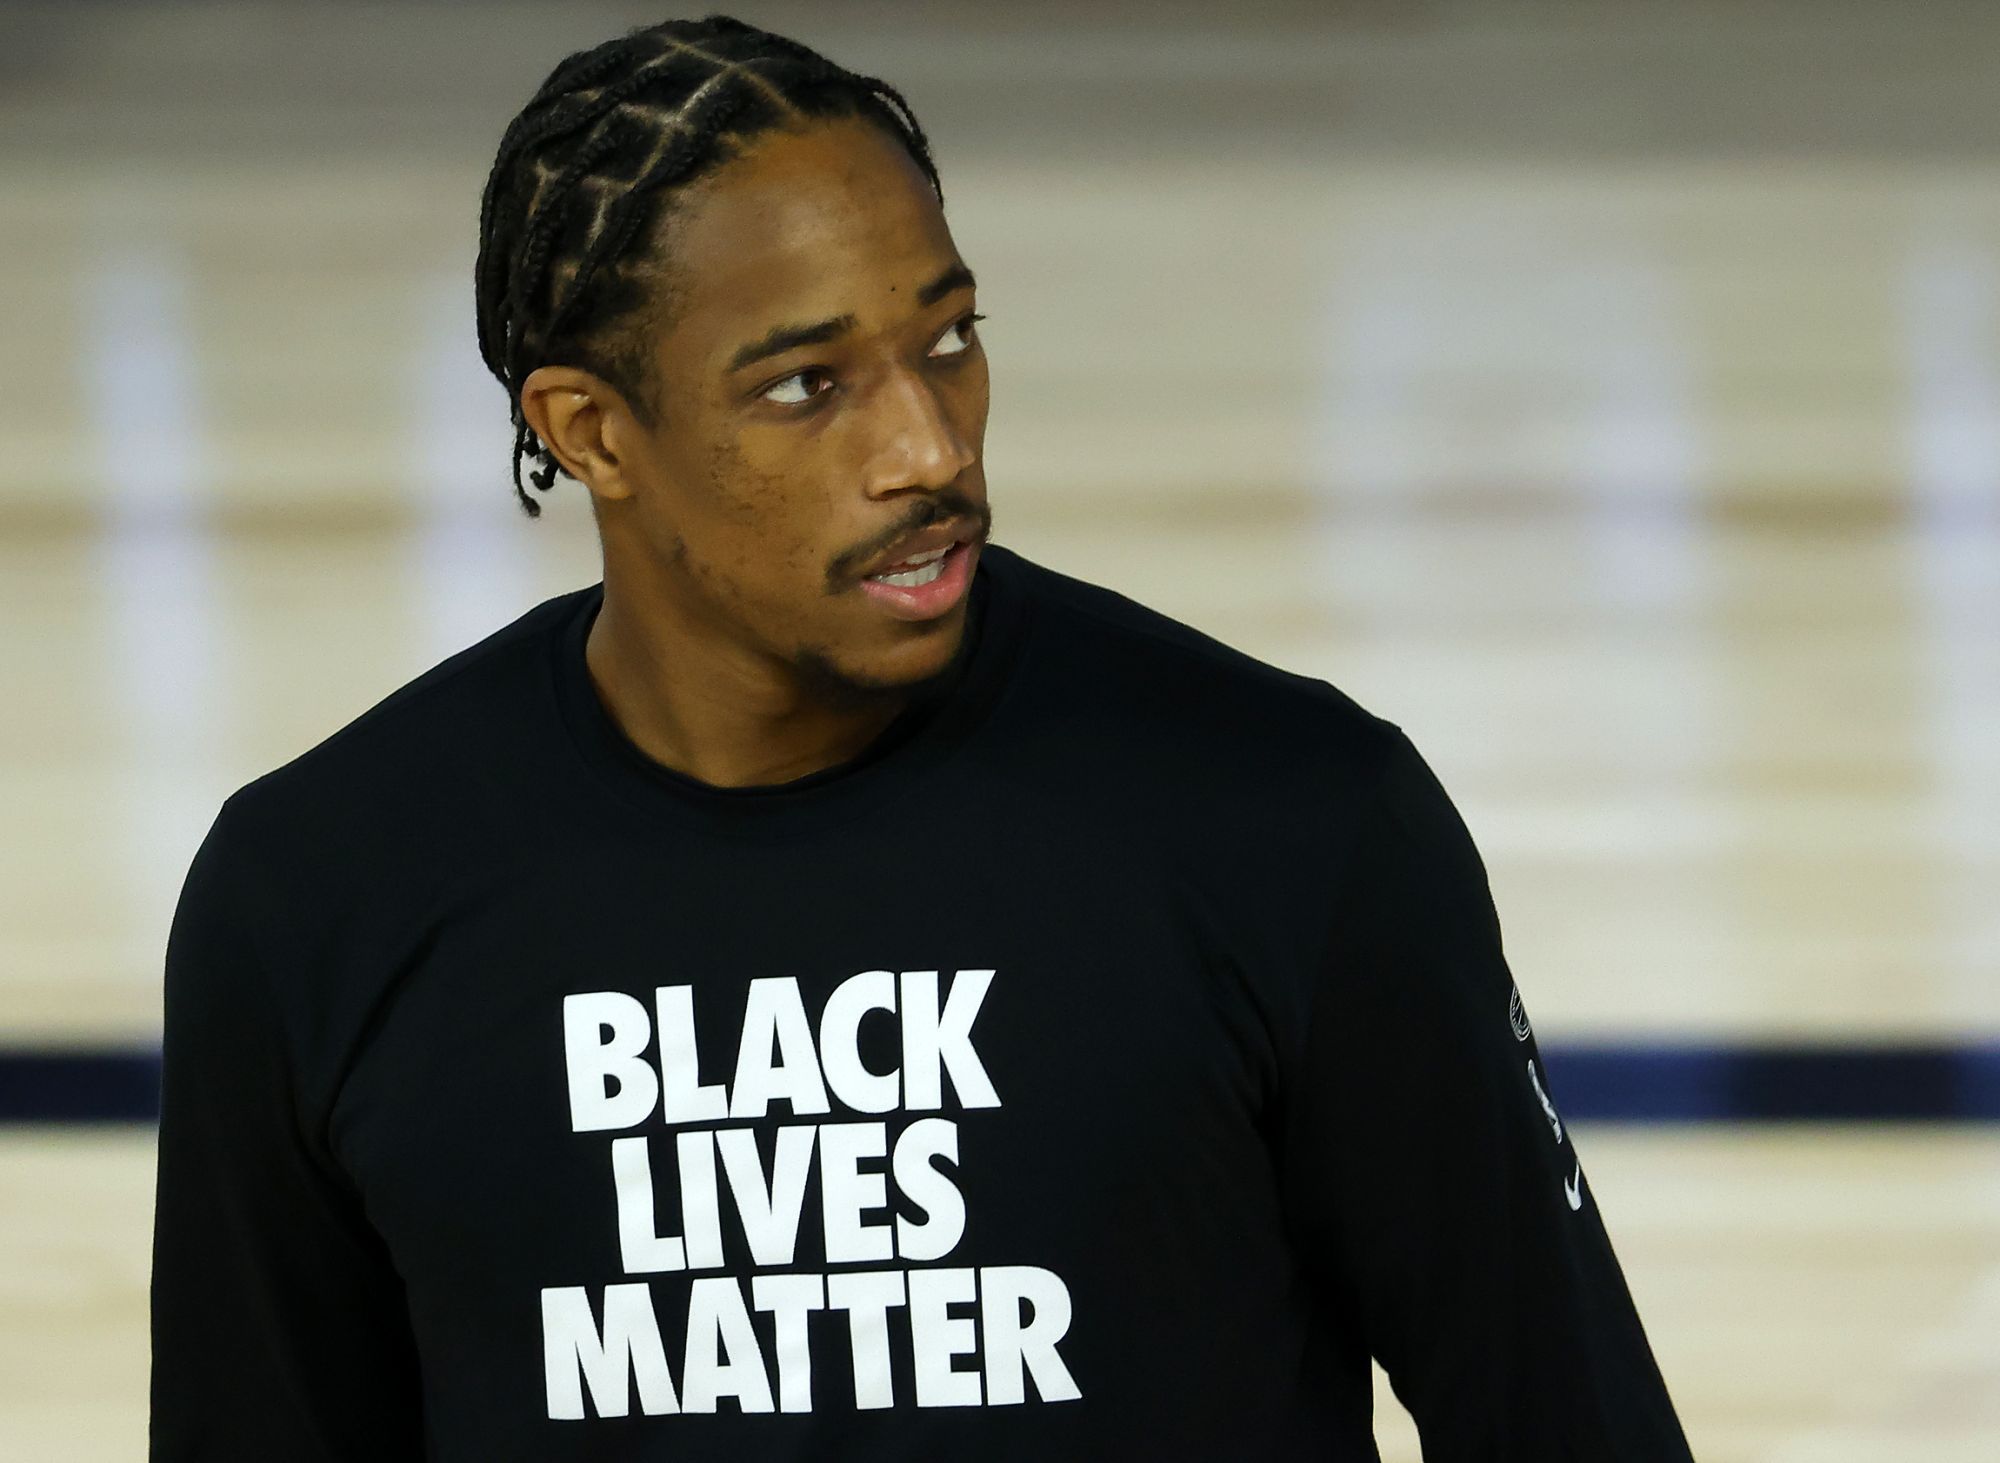 DeMar DeRozan Stops Home Invasion Intended for Kylie Jenner: Reports